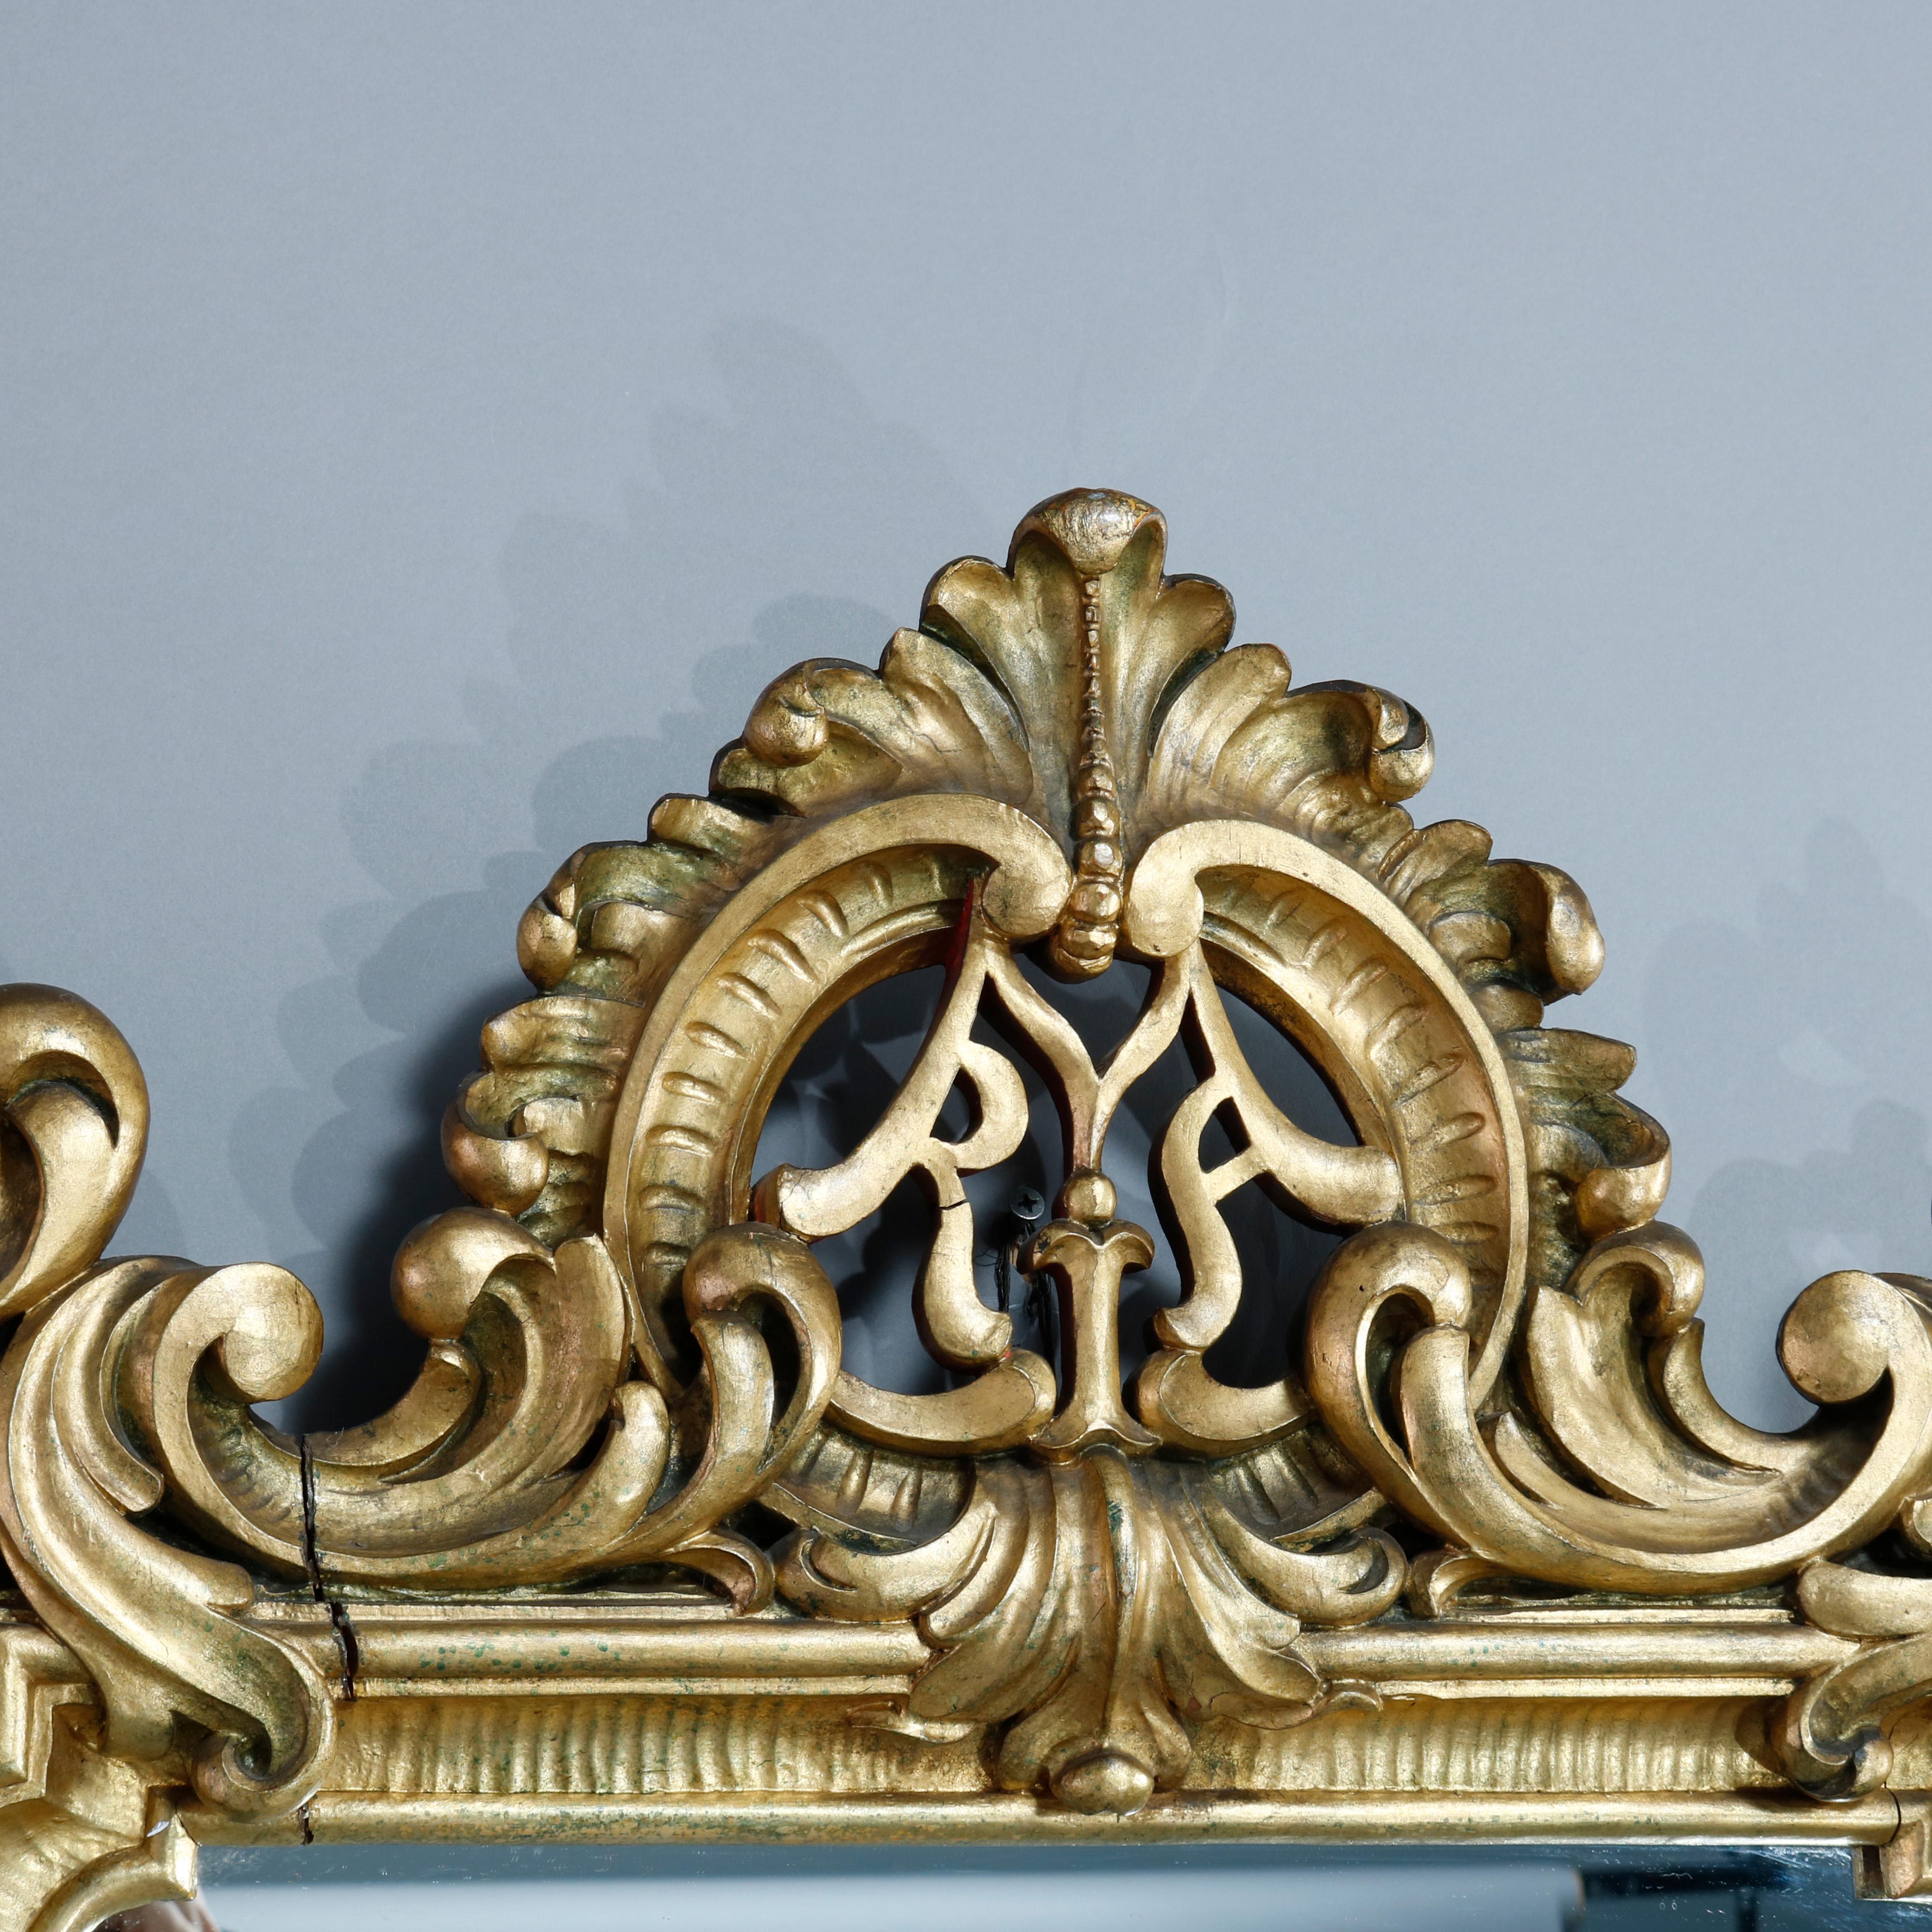 An antique French Louis XIV style wall mirror offer giltwood frame with pierced foliate crest and scroll acanthus elements throughout, c1900.

Measures: 42.5